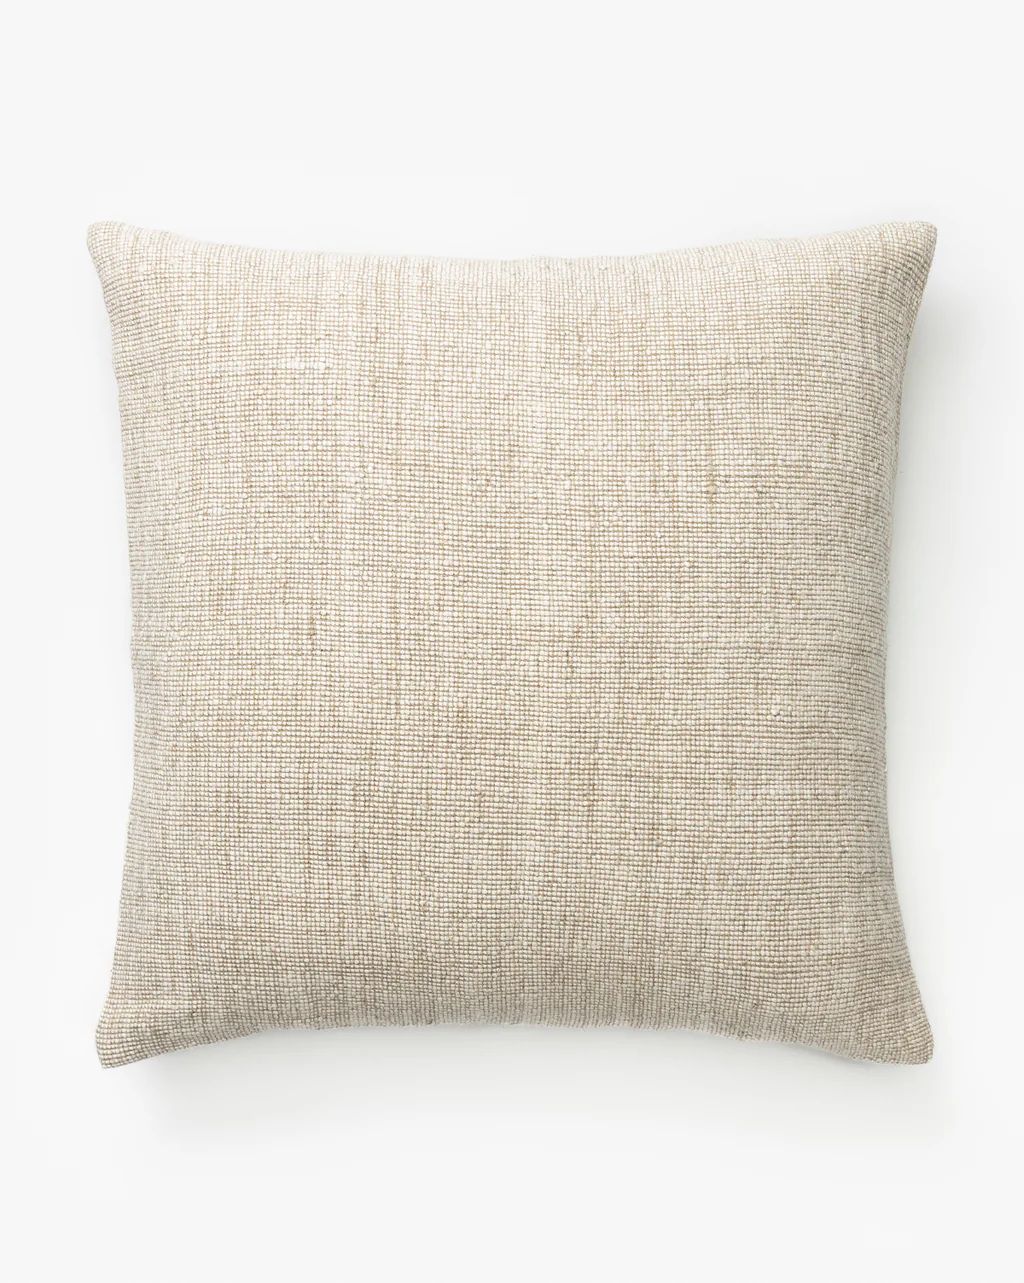 Ivel Pillow Cover | McGee & Co. (US)